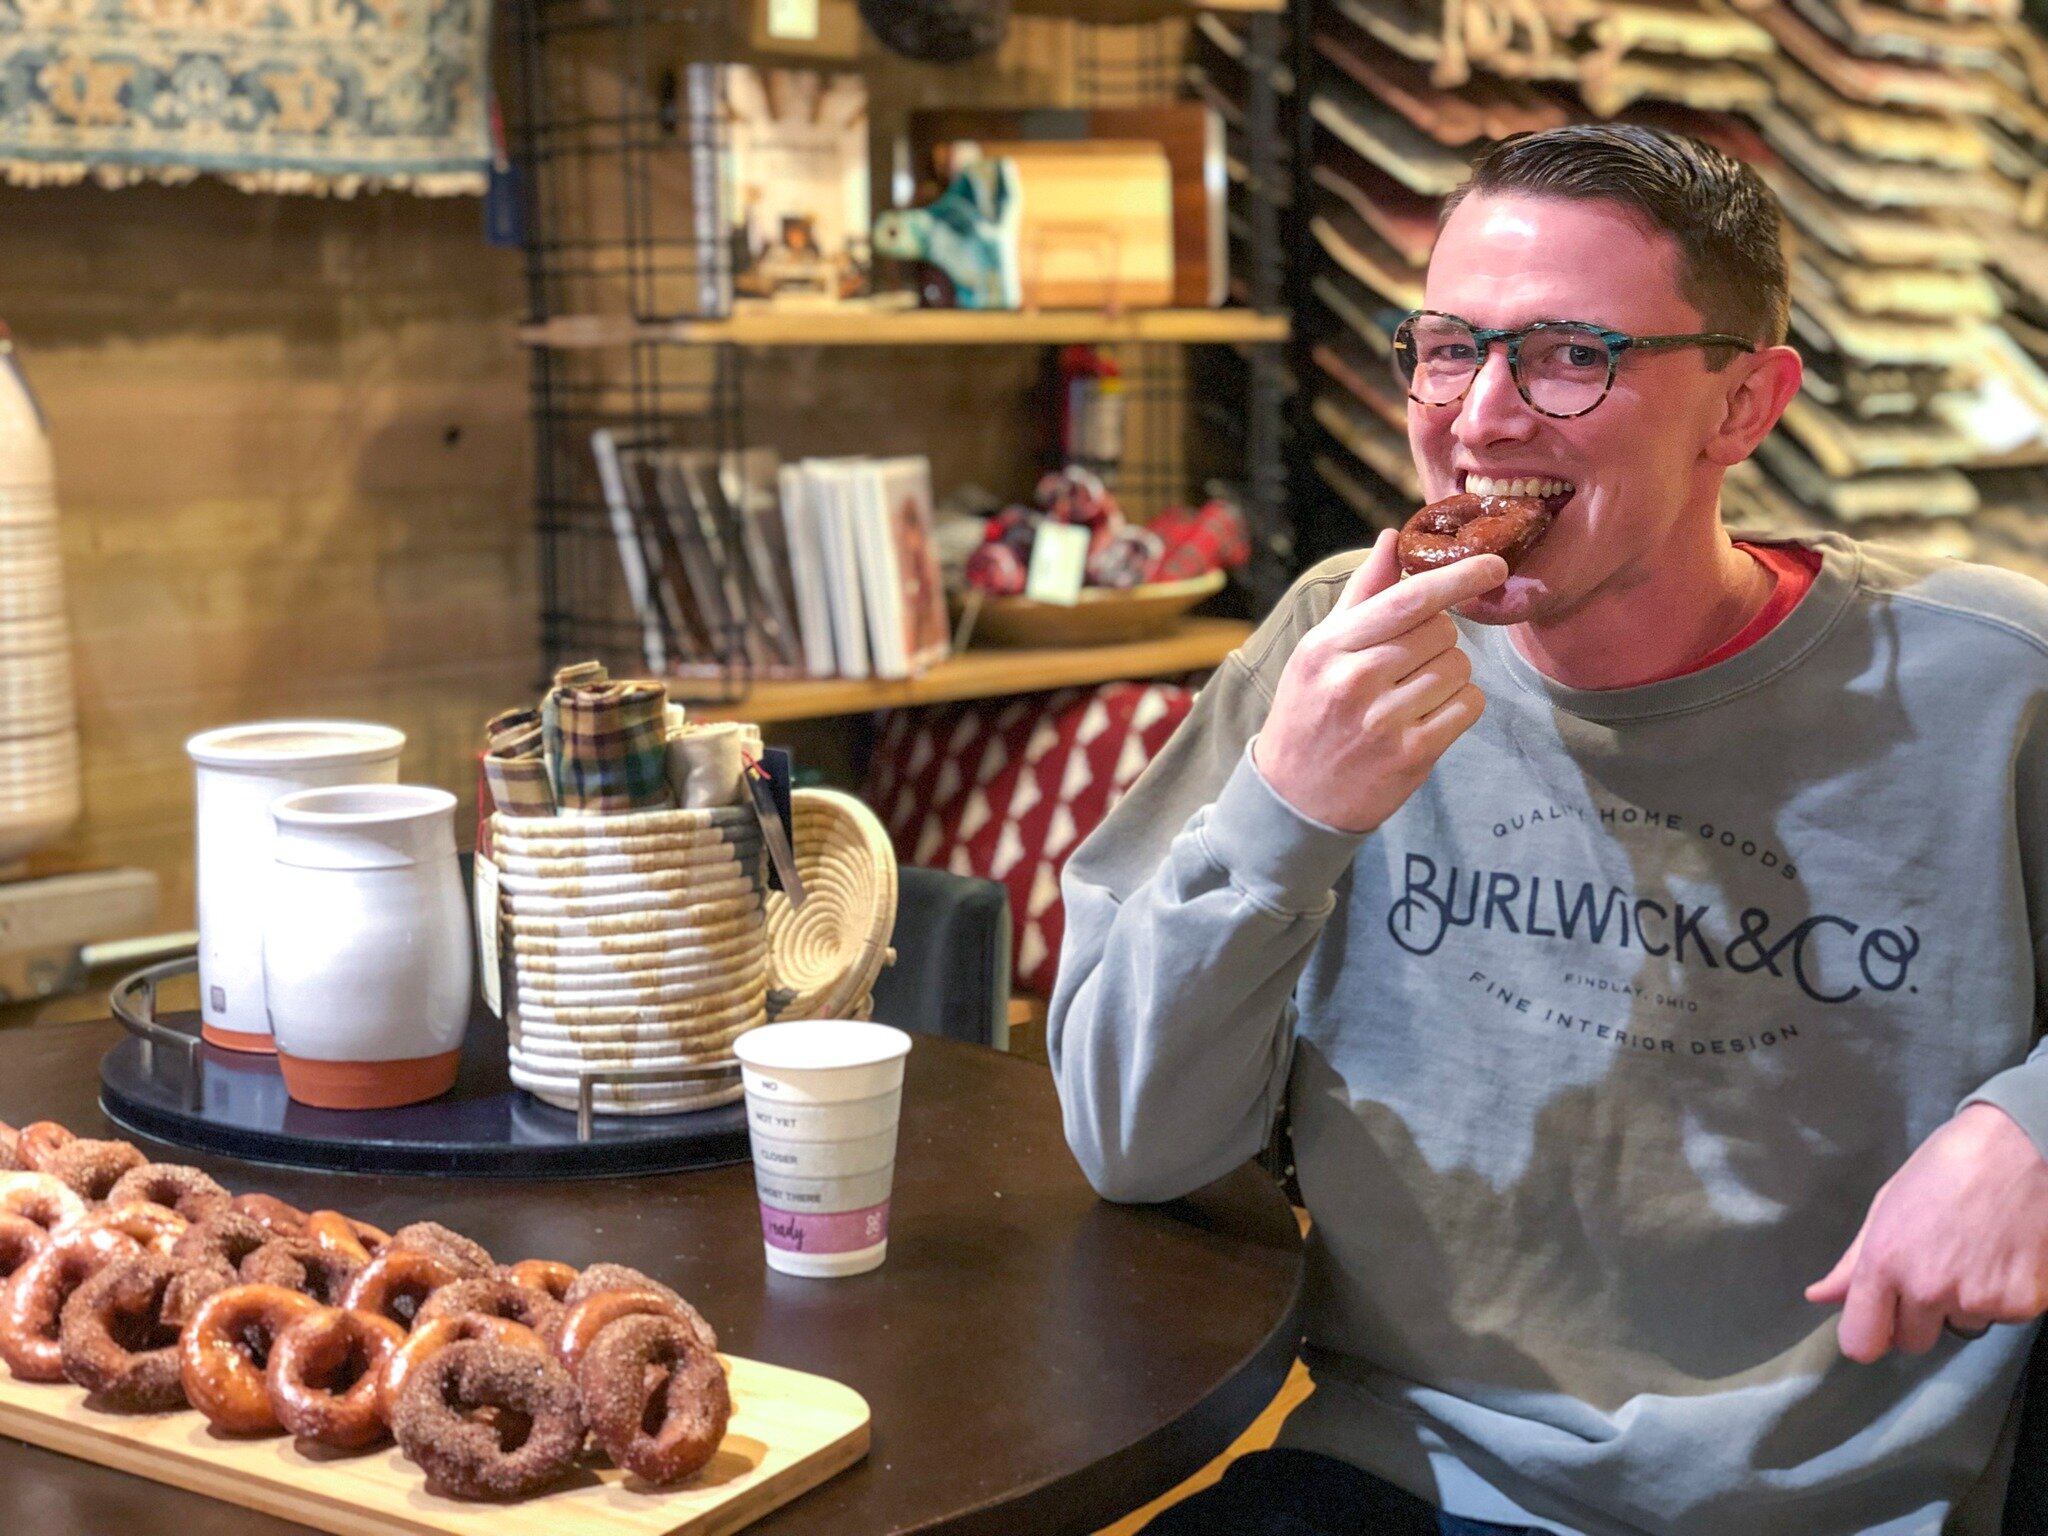 Our beloved local doughnut maker, Ian Heitkamp, won the $50 Burlwick gift card from Small Business Saturday's drawing - congratulations! 👏🏻

He runs @ians_doughnuts and if you haven't tried his doughnuts yet, you're missing out. 🍩 Made from scratc